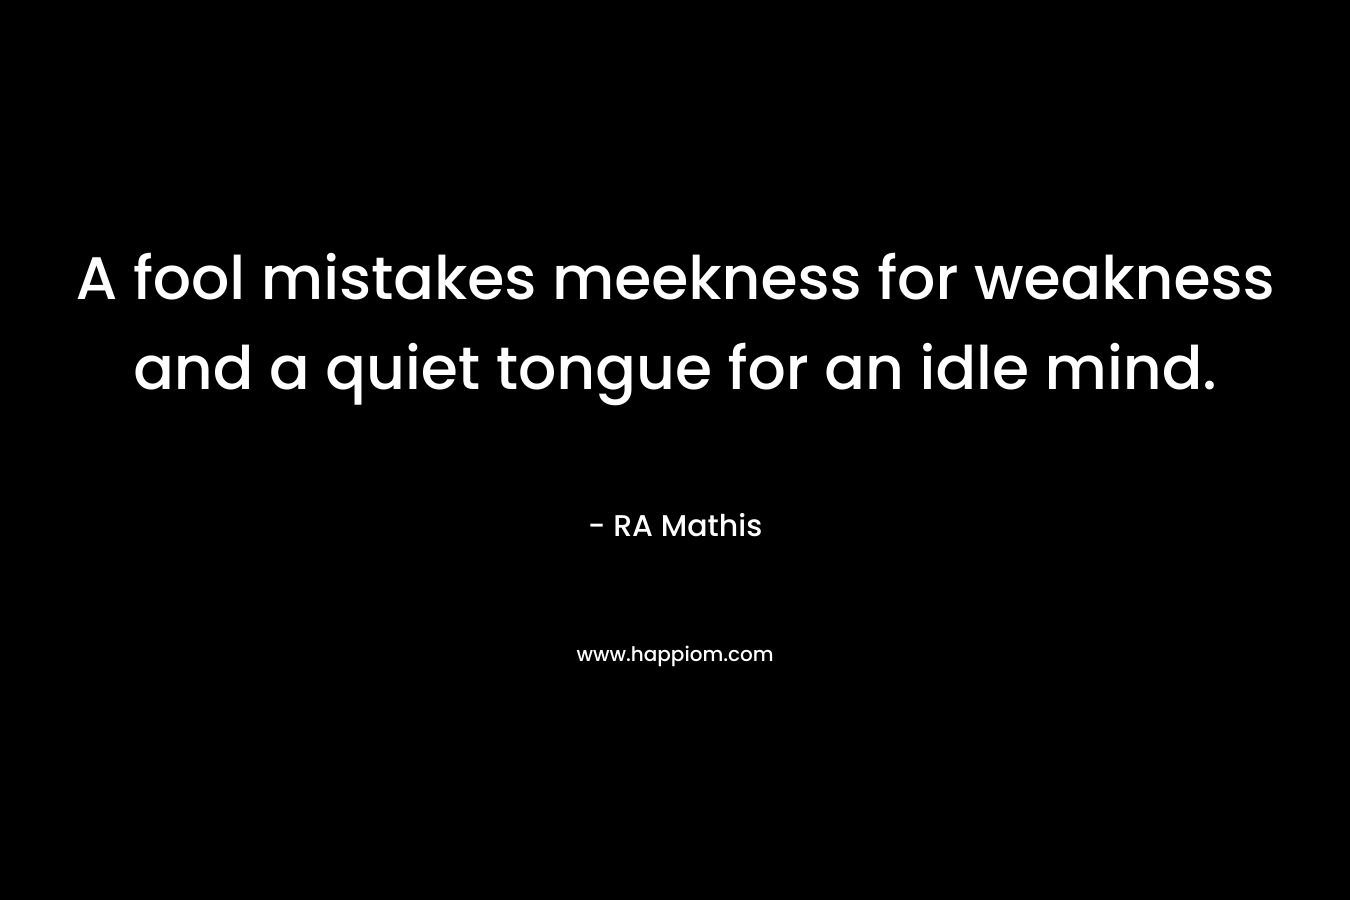 A fool mistakes meekness for weakness and a quiet tongue for an idle mind. – RA Mathis